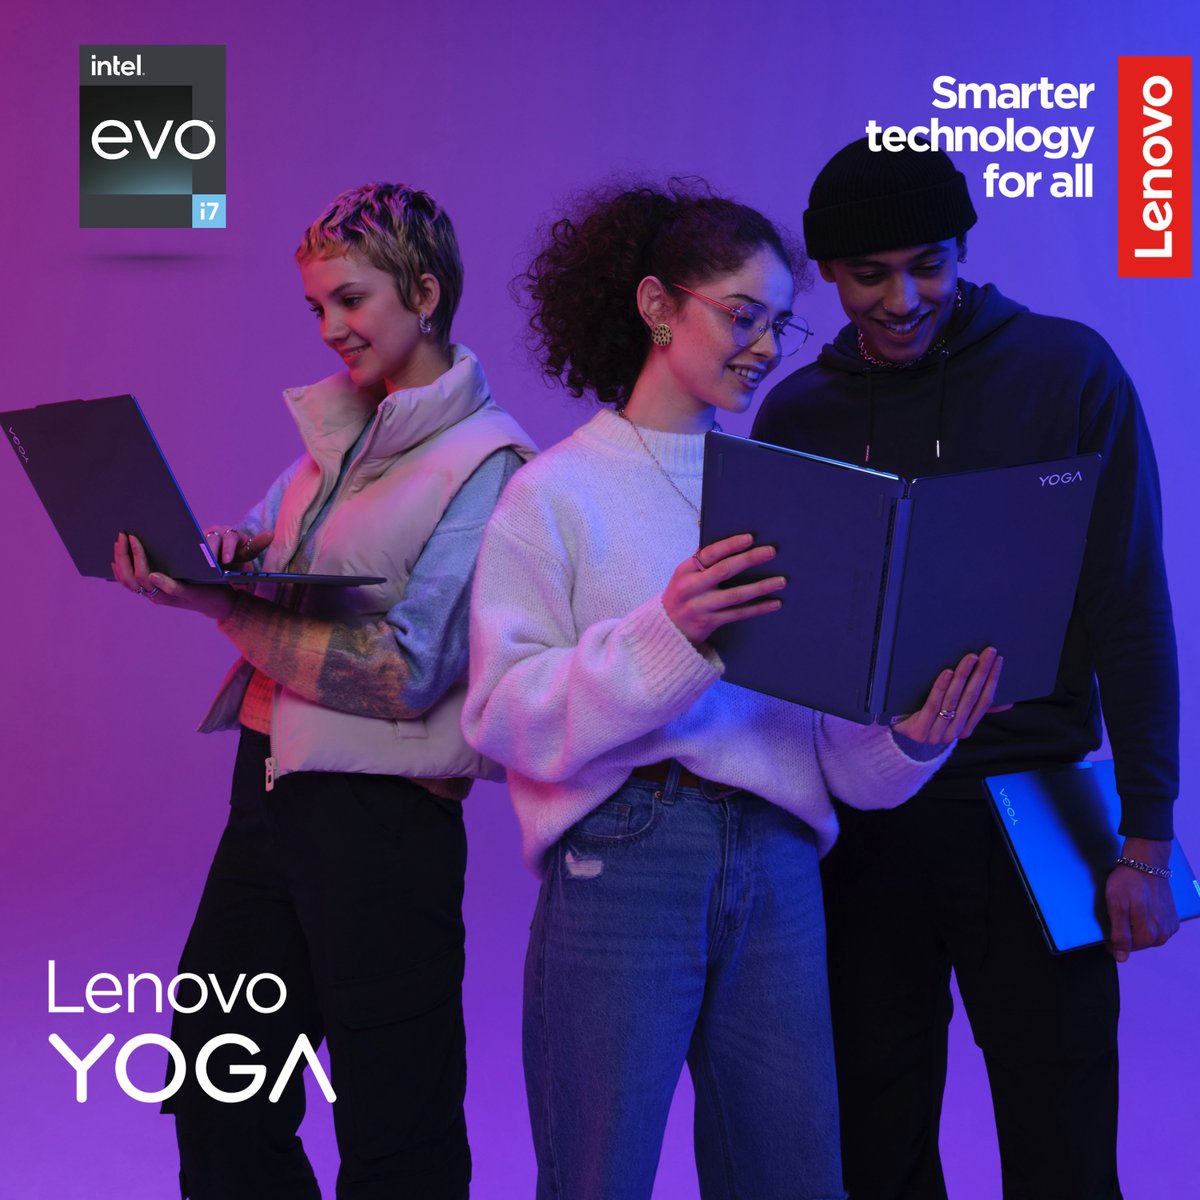 We're bringing the power of the Lenovo Yoga series to the Trafford Centre, Manchester on 23rd & 24th March. Come and join us to see how you can shape your ✨creativity✨ with demos from artists from the world of music, fashion, art and design #YogaCreate #Intel